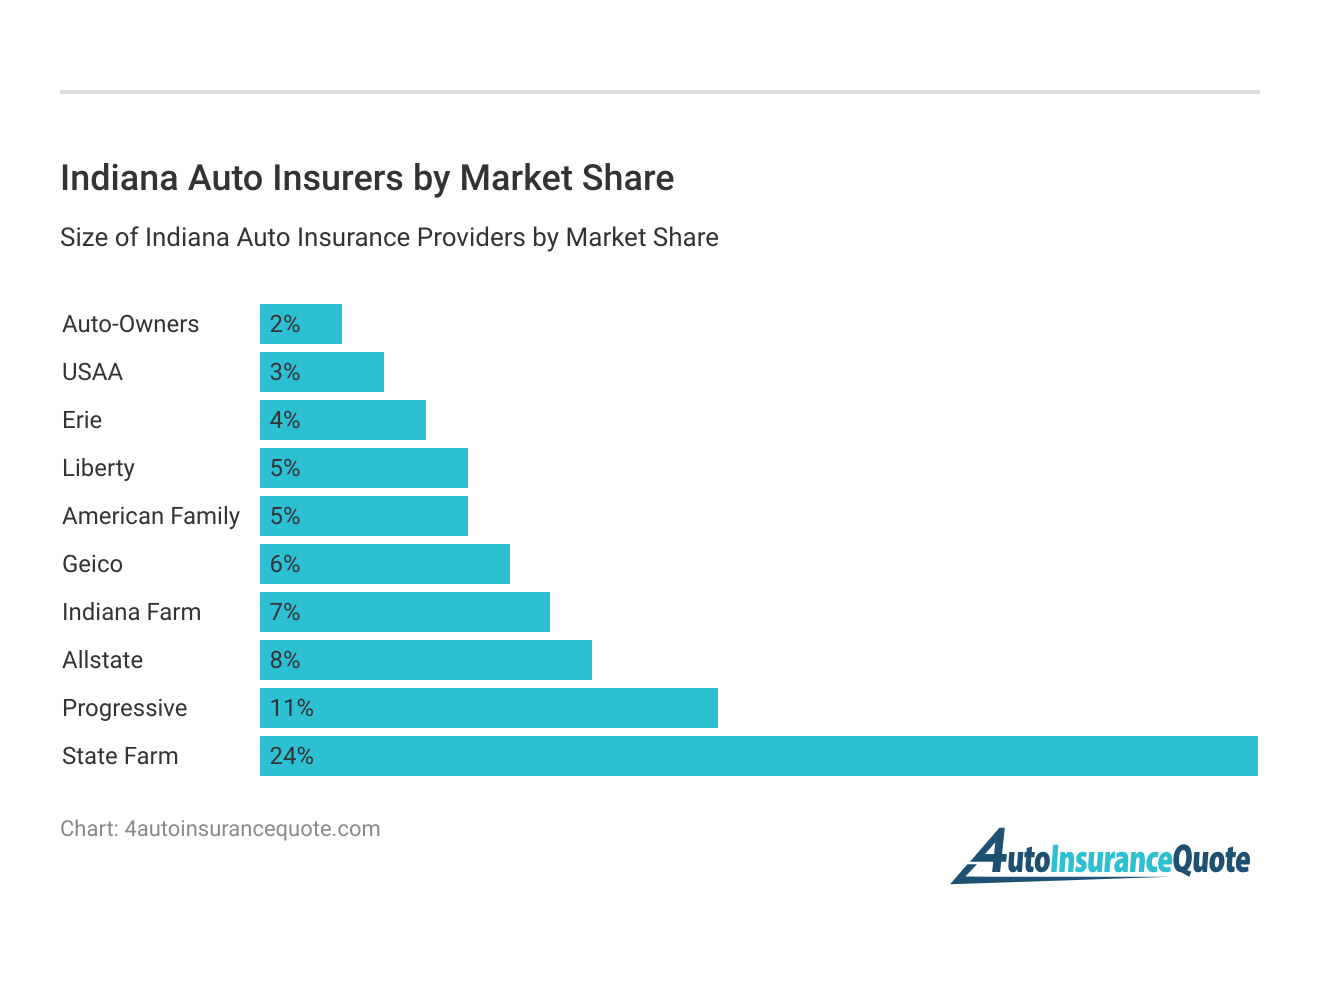 <h3>Indiana Auto Insurers by Market Share</h3>